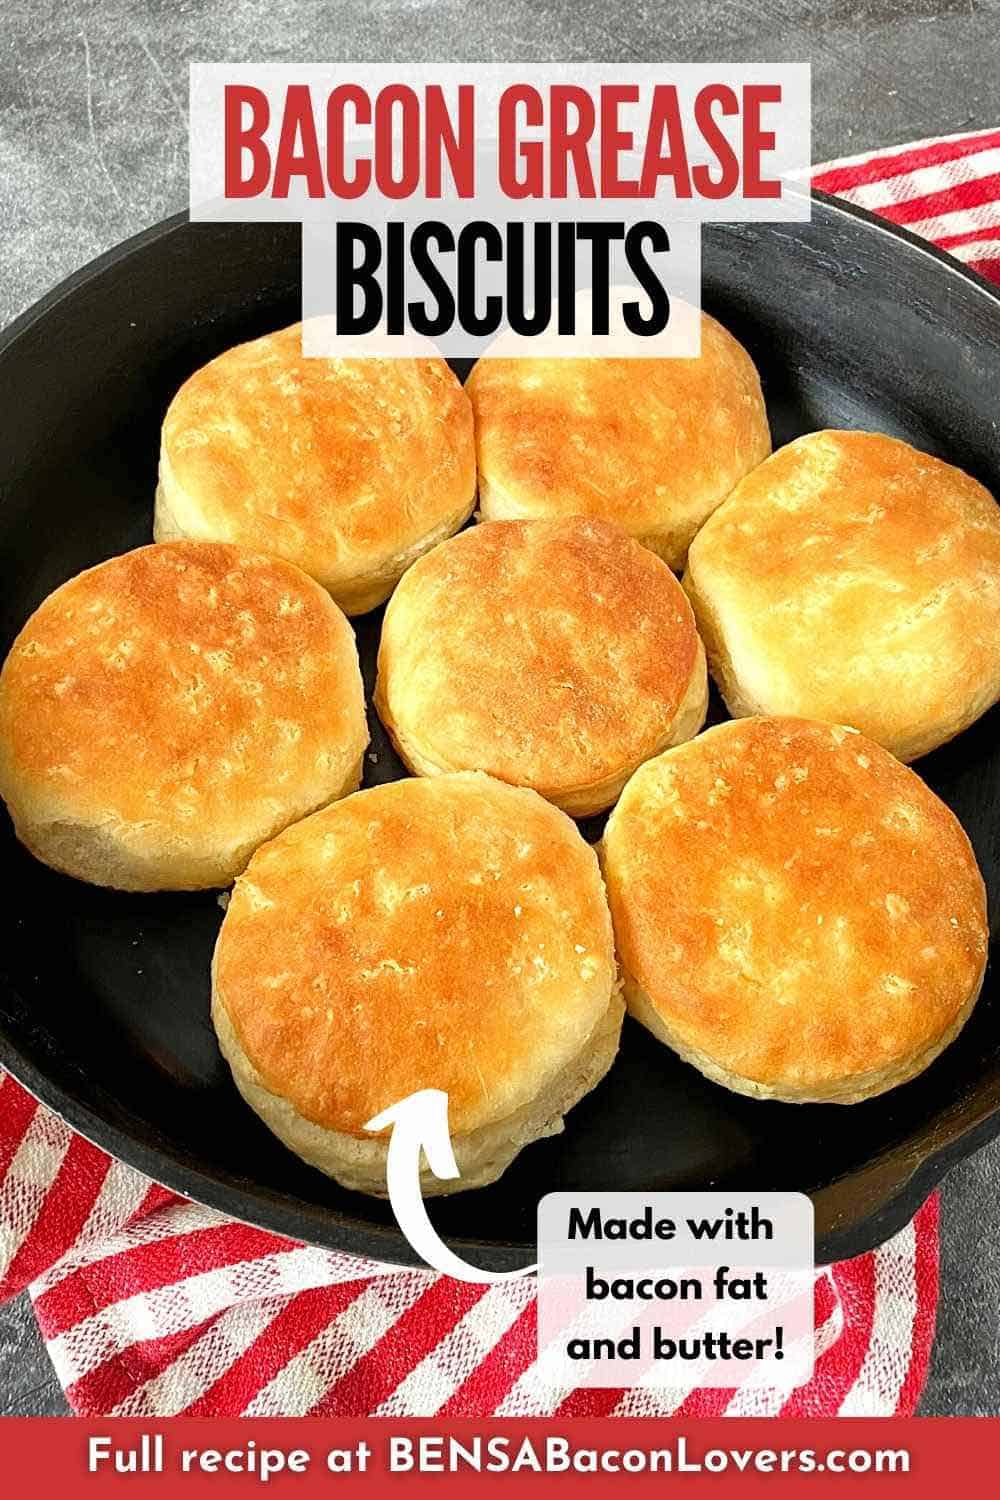 A cast iron skillet filled with baked buttermilk biscuits made with bacon grease.